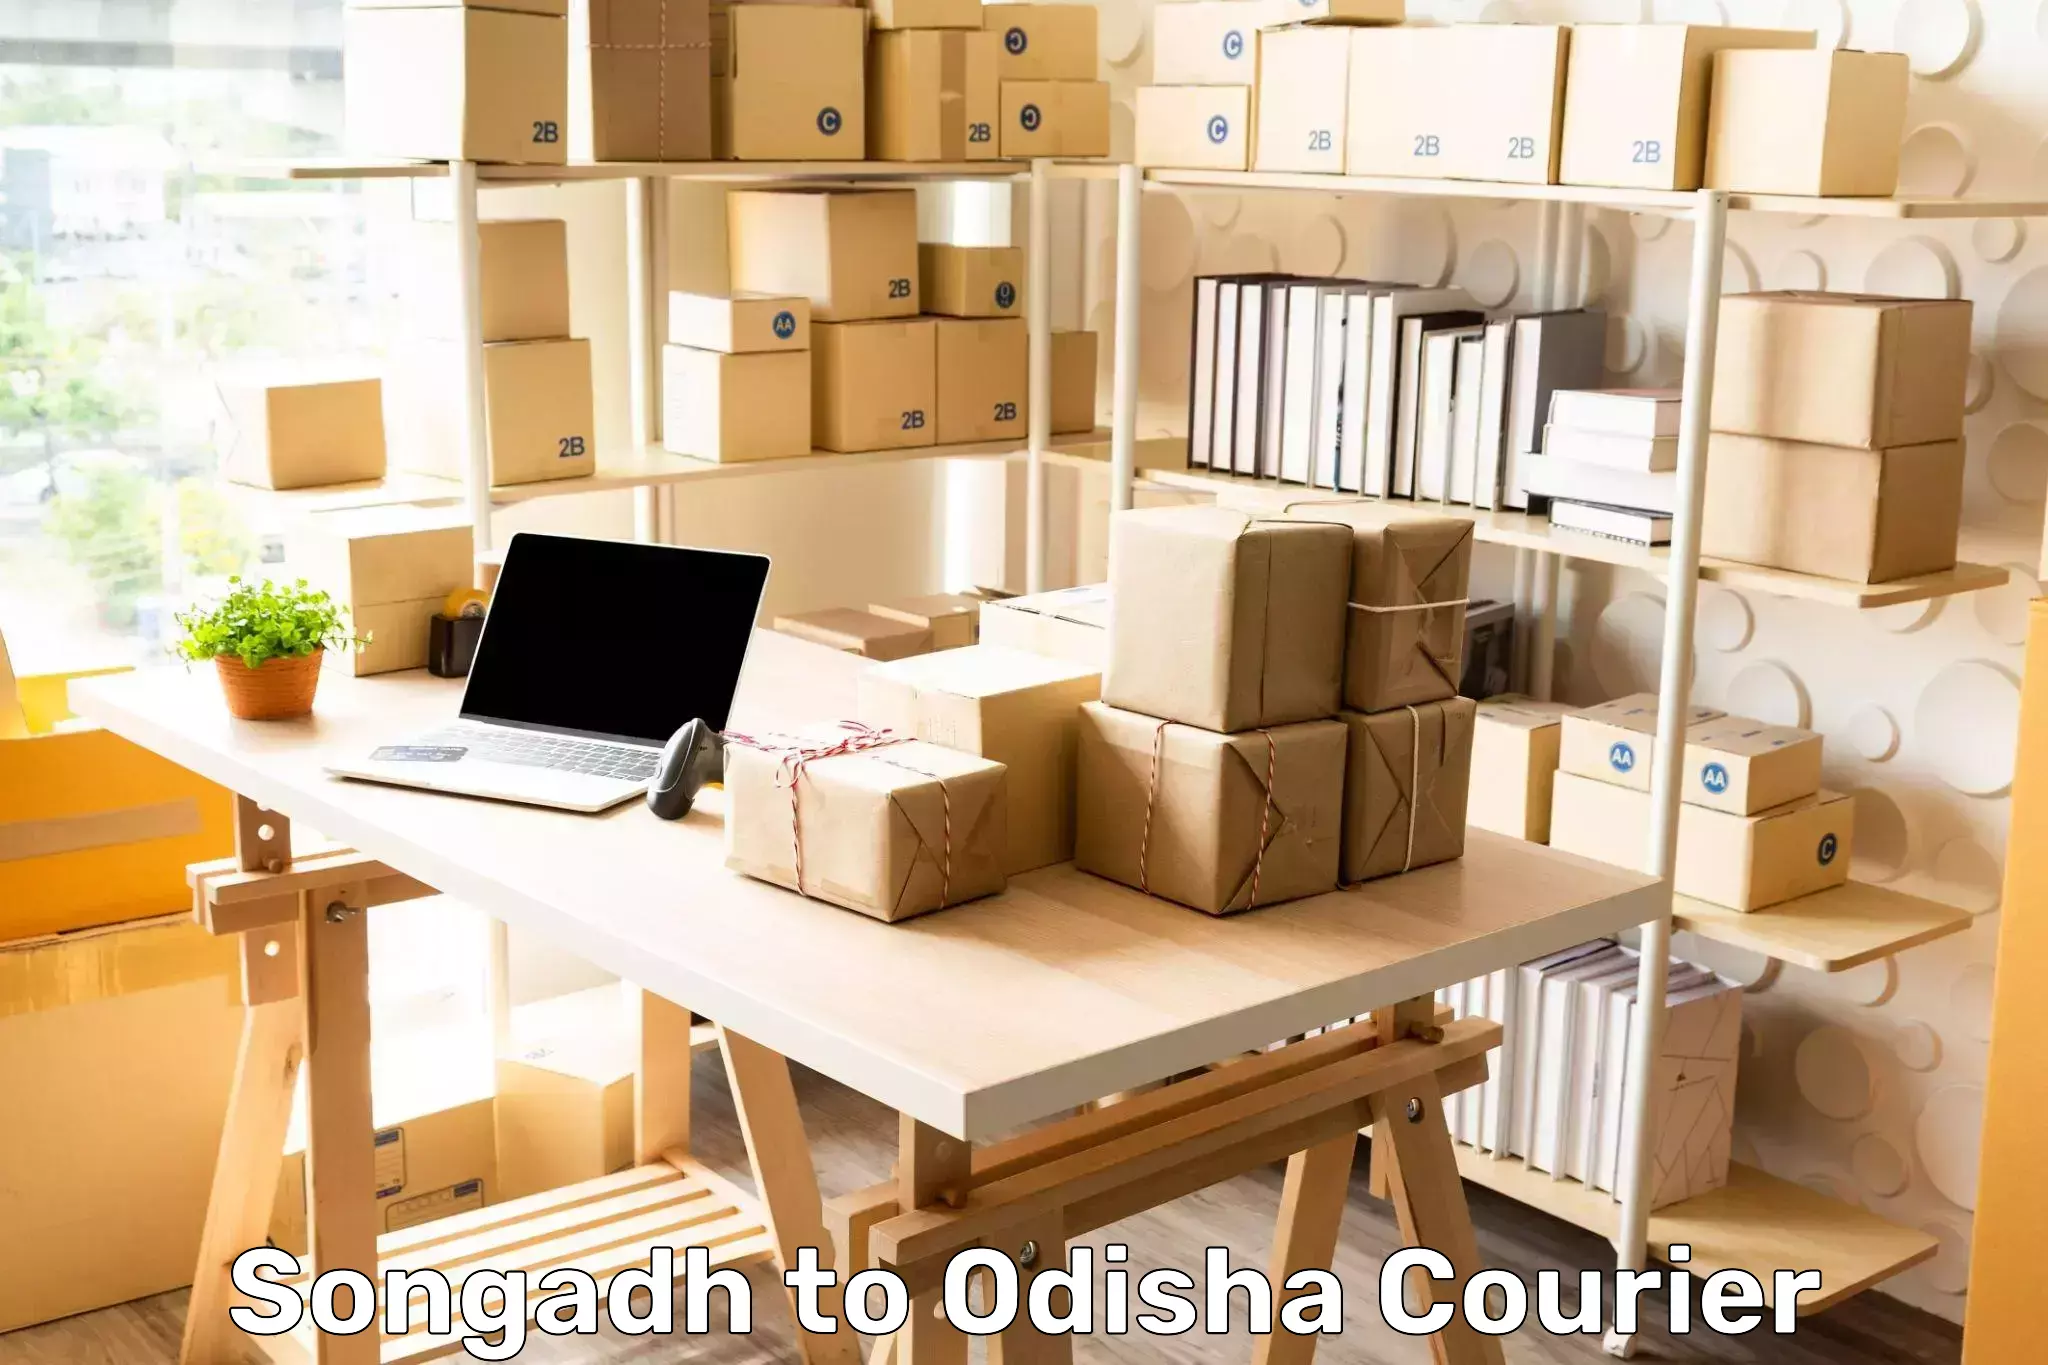 Parcel service for businesses Songadh to Talcher